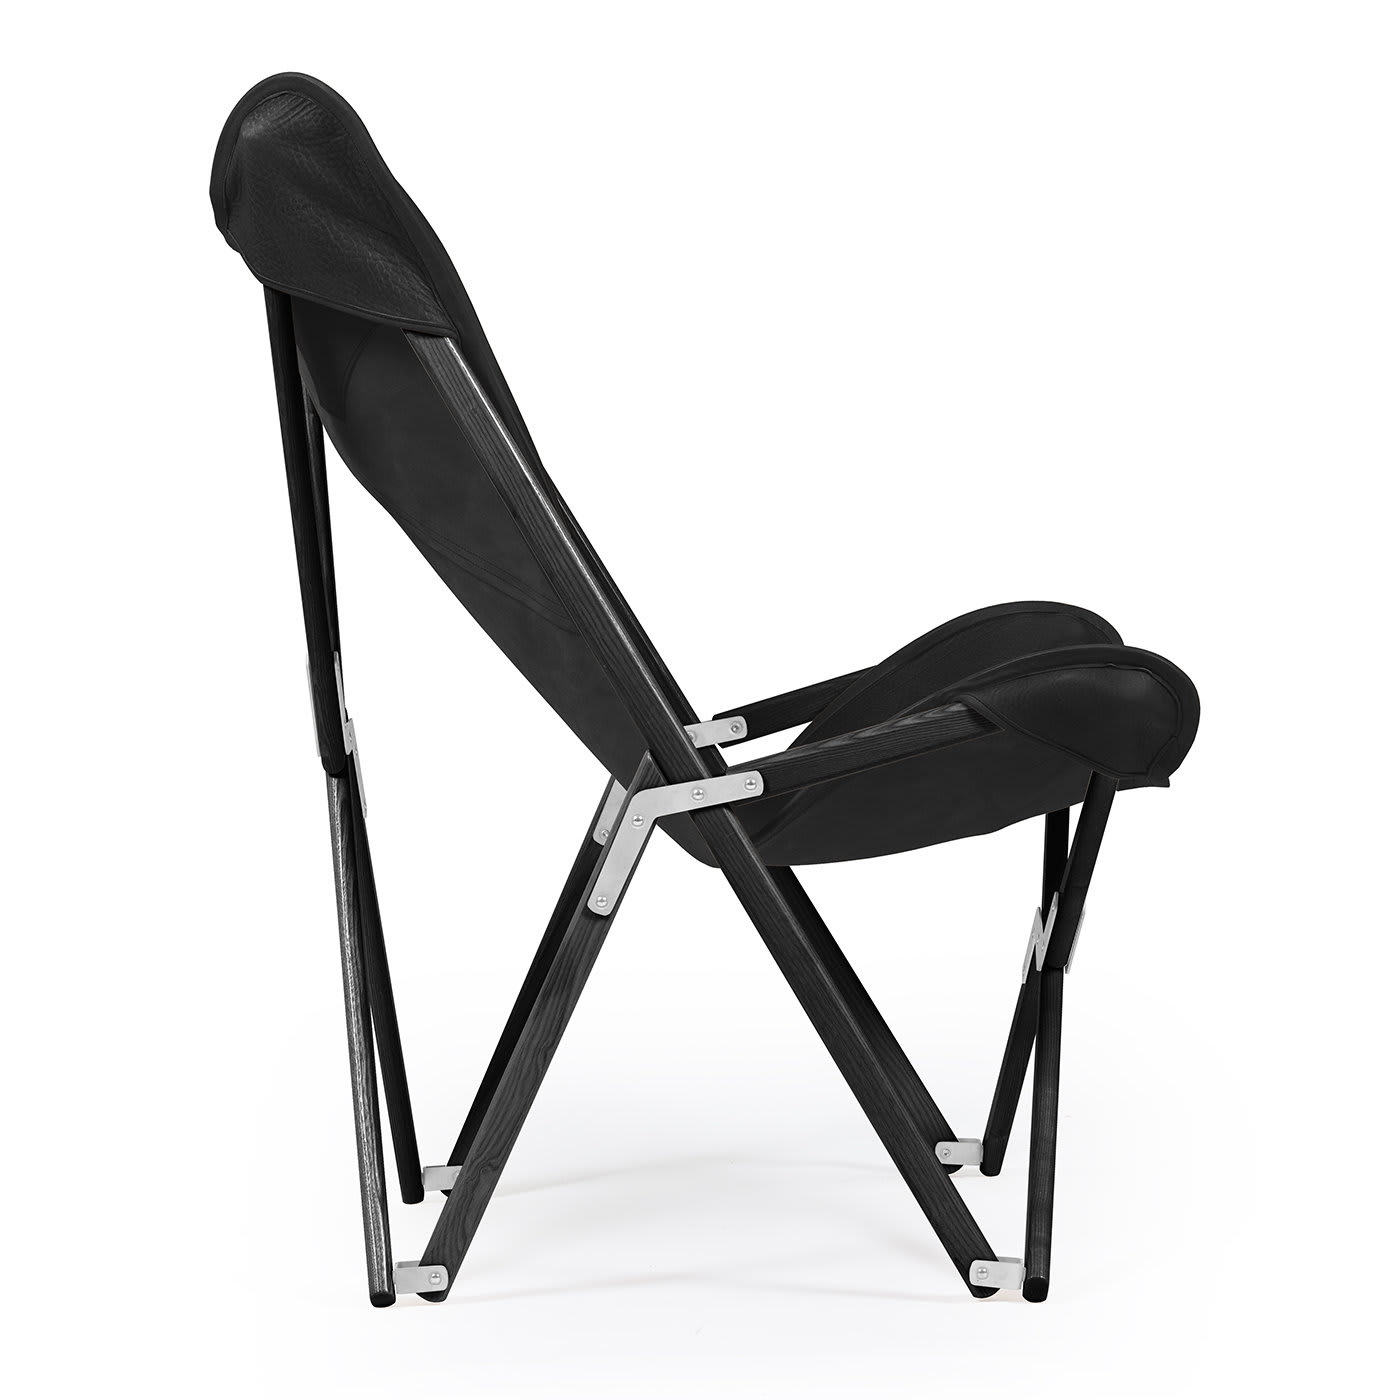 Tripolina Armchair in Black Leather - Telami